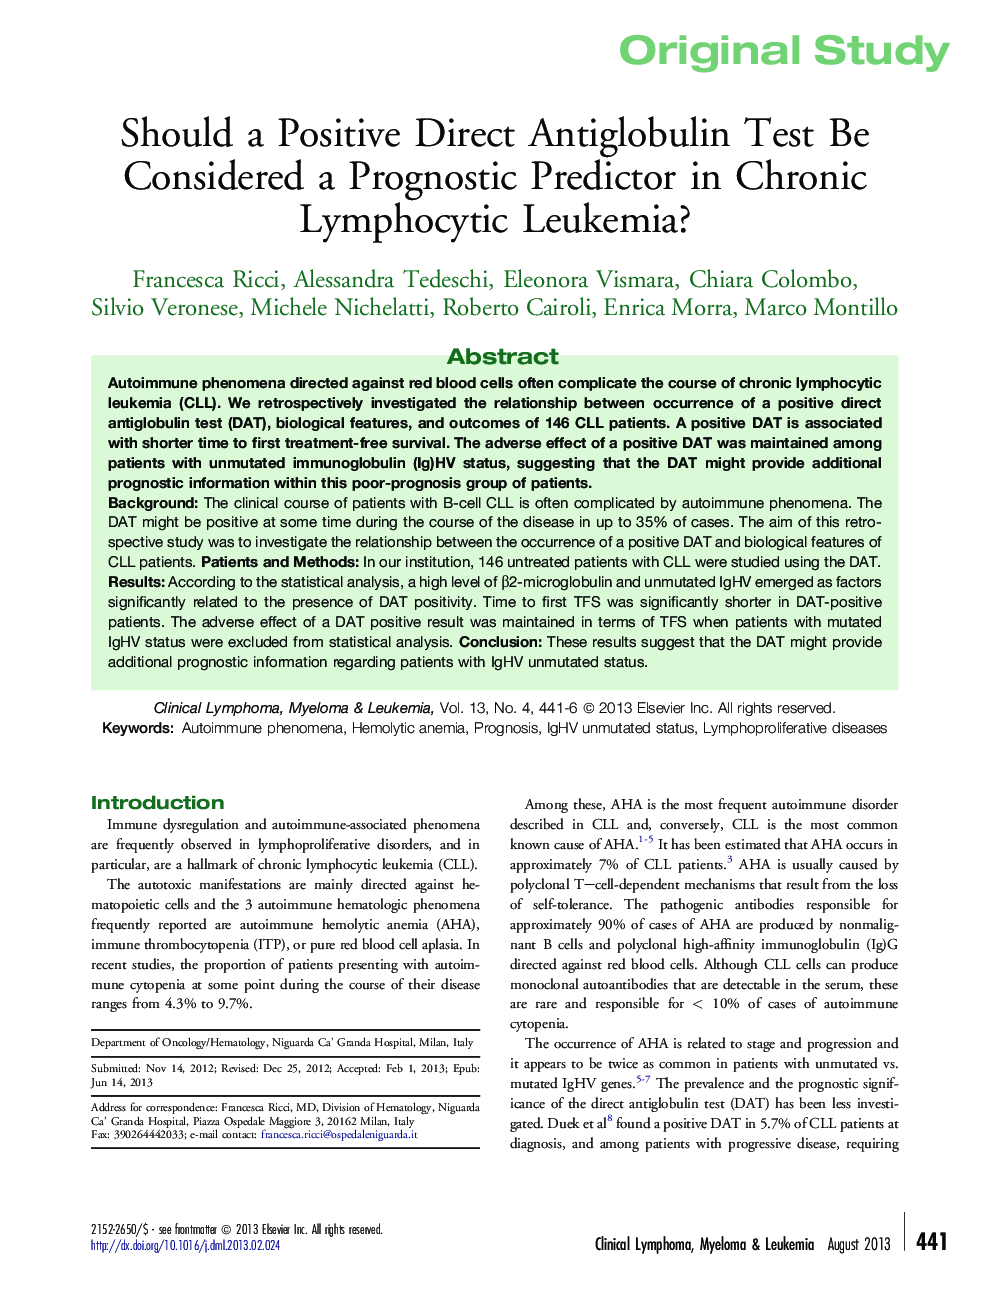 Should a Positive Direct Antiglobulin Test Be Considered a Prognostic Predictor in Chronic Lymphocytic Leukemia?